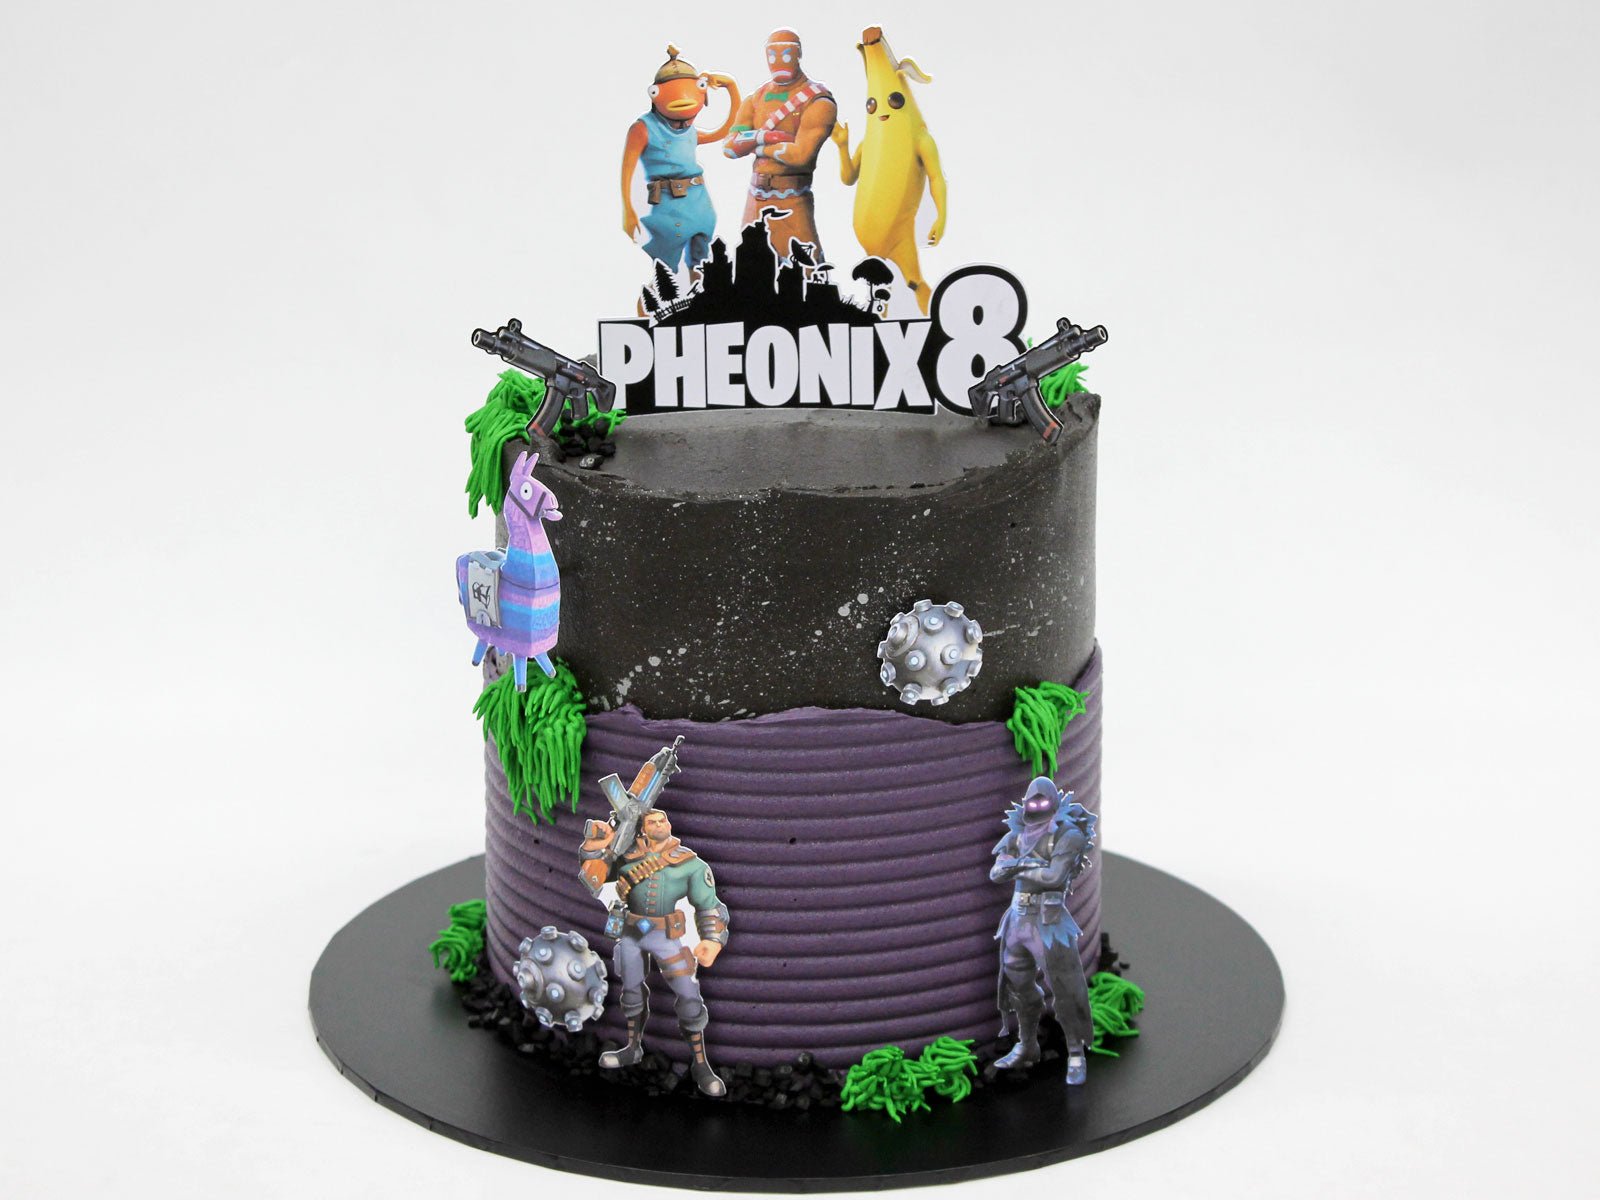 Fortnite Cake Ideas To Inspire You : Marshmallow Two-Tiered Cake